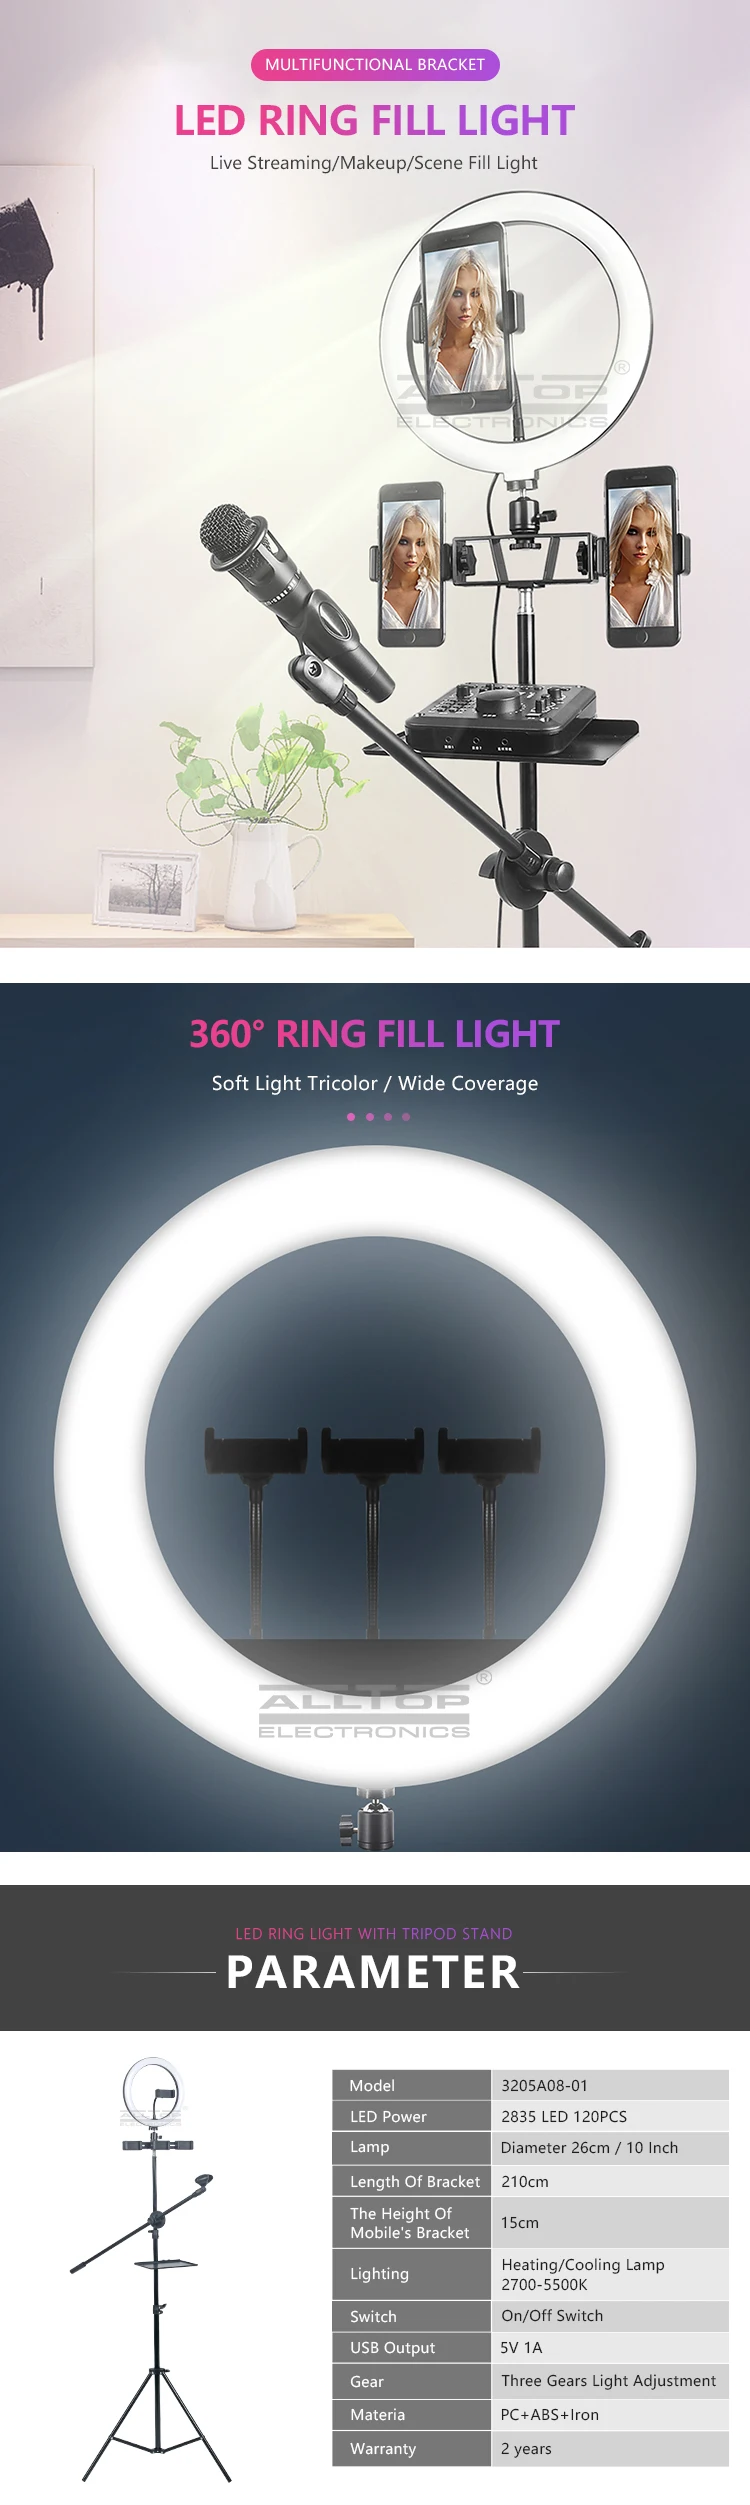 ALLTOP High Quality Photographic live streaming lighting kit with remote control 18 Inch selfie led ring light